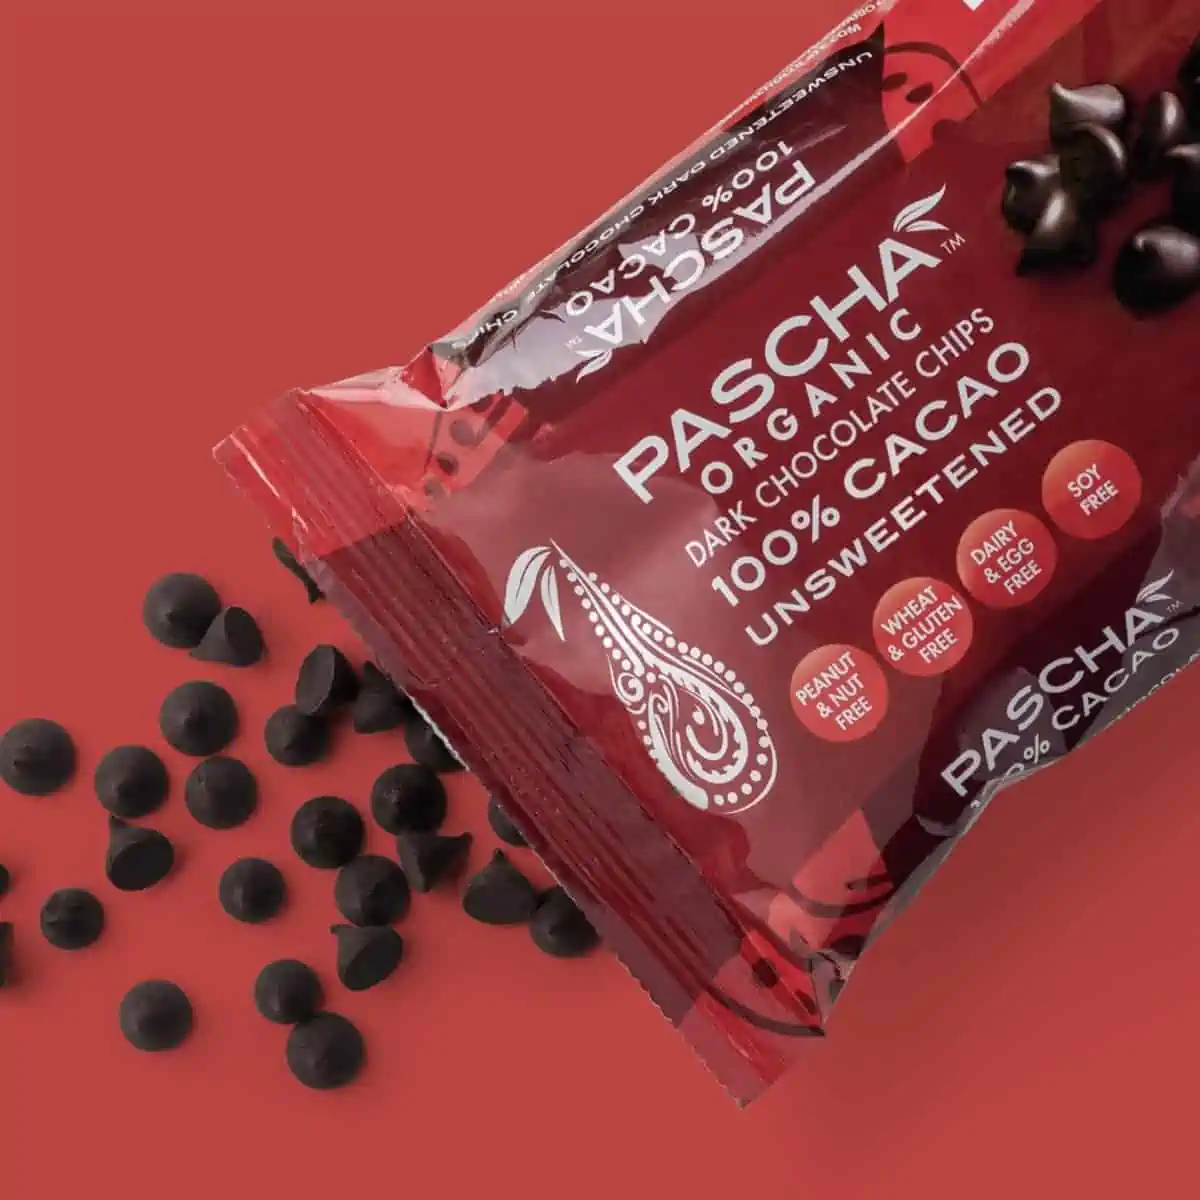 Pascha brand cacao dark chocolate chips for baking spilling out of a bag.